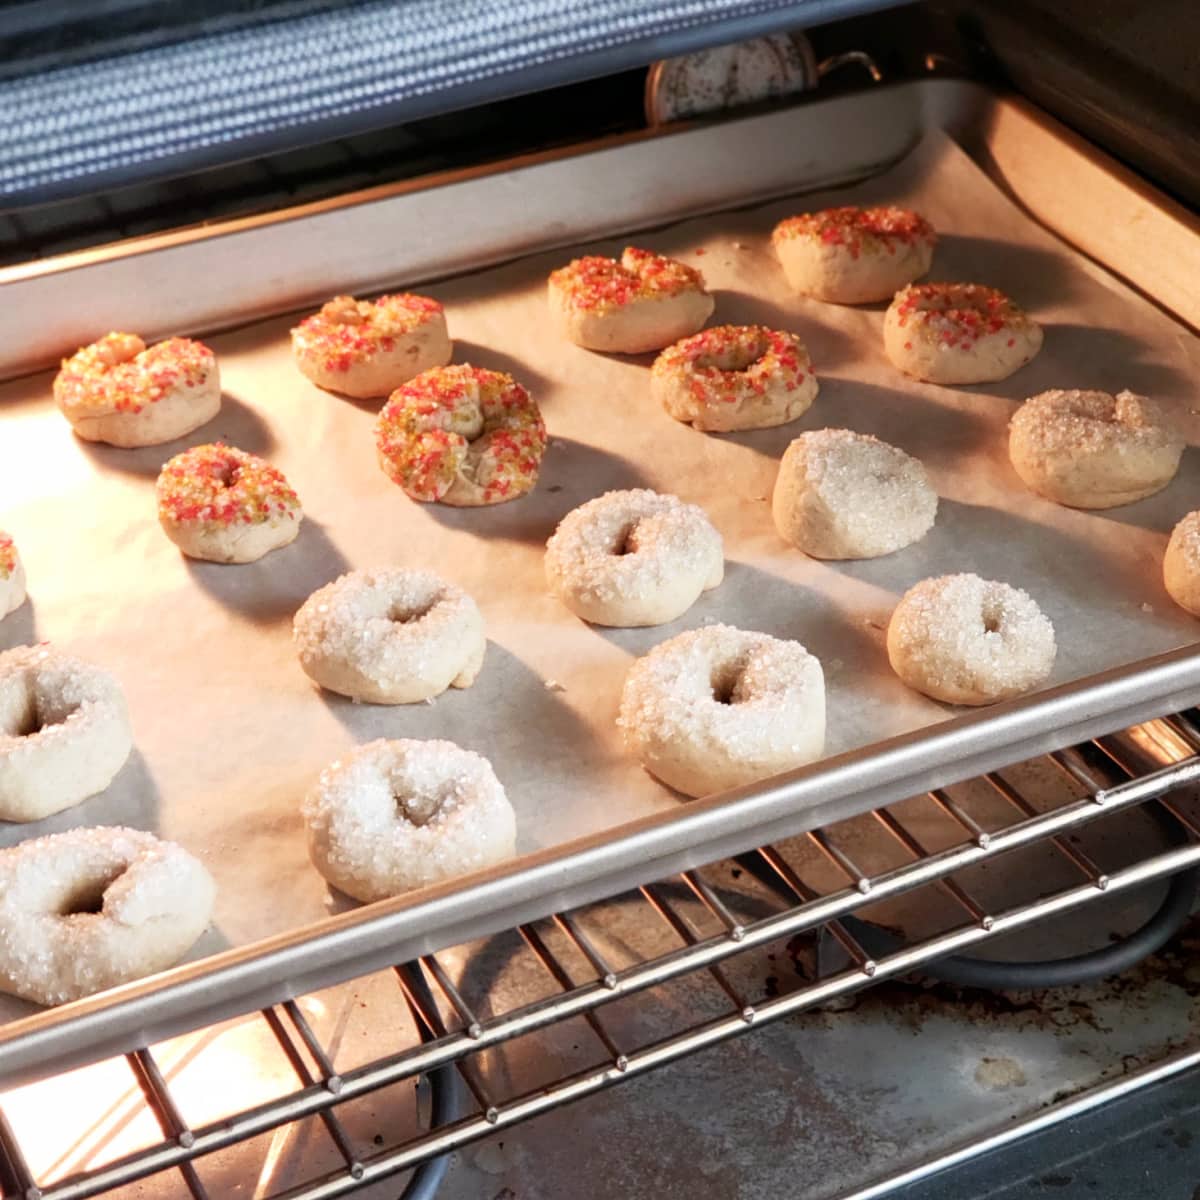 A baking sheet full of donut-shaped Taralli cookies with color sugar on top, in the oven